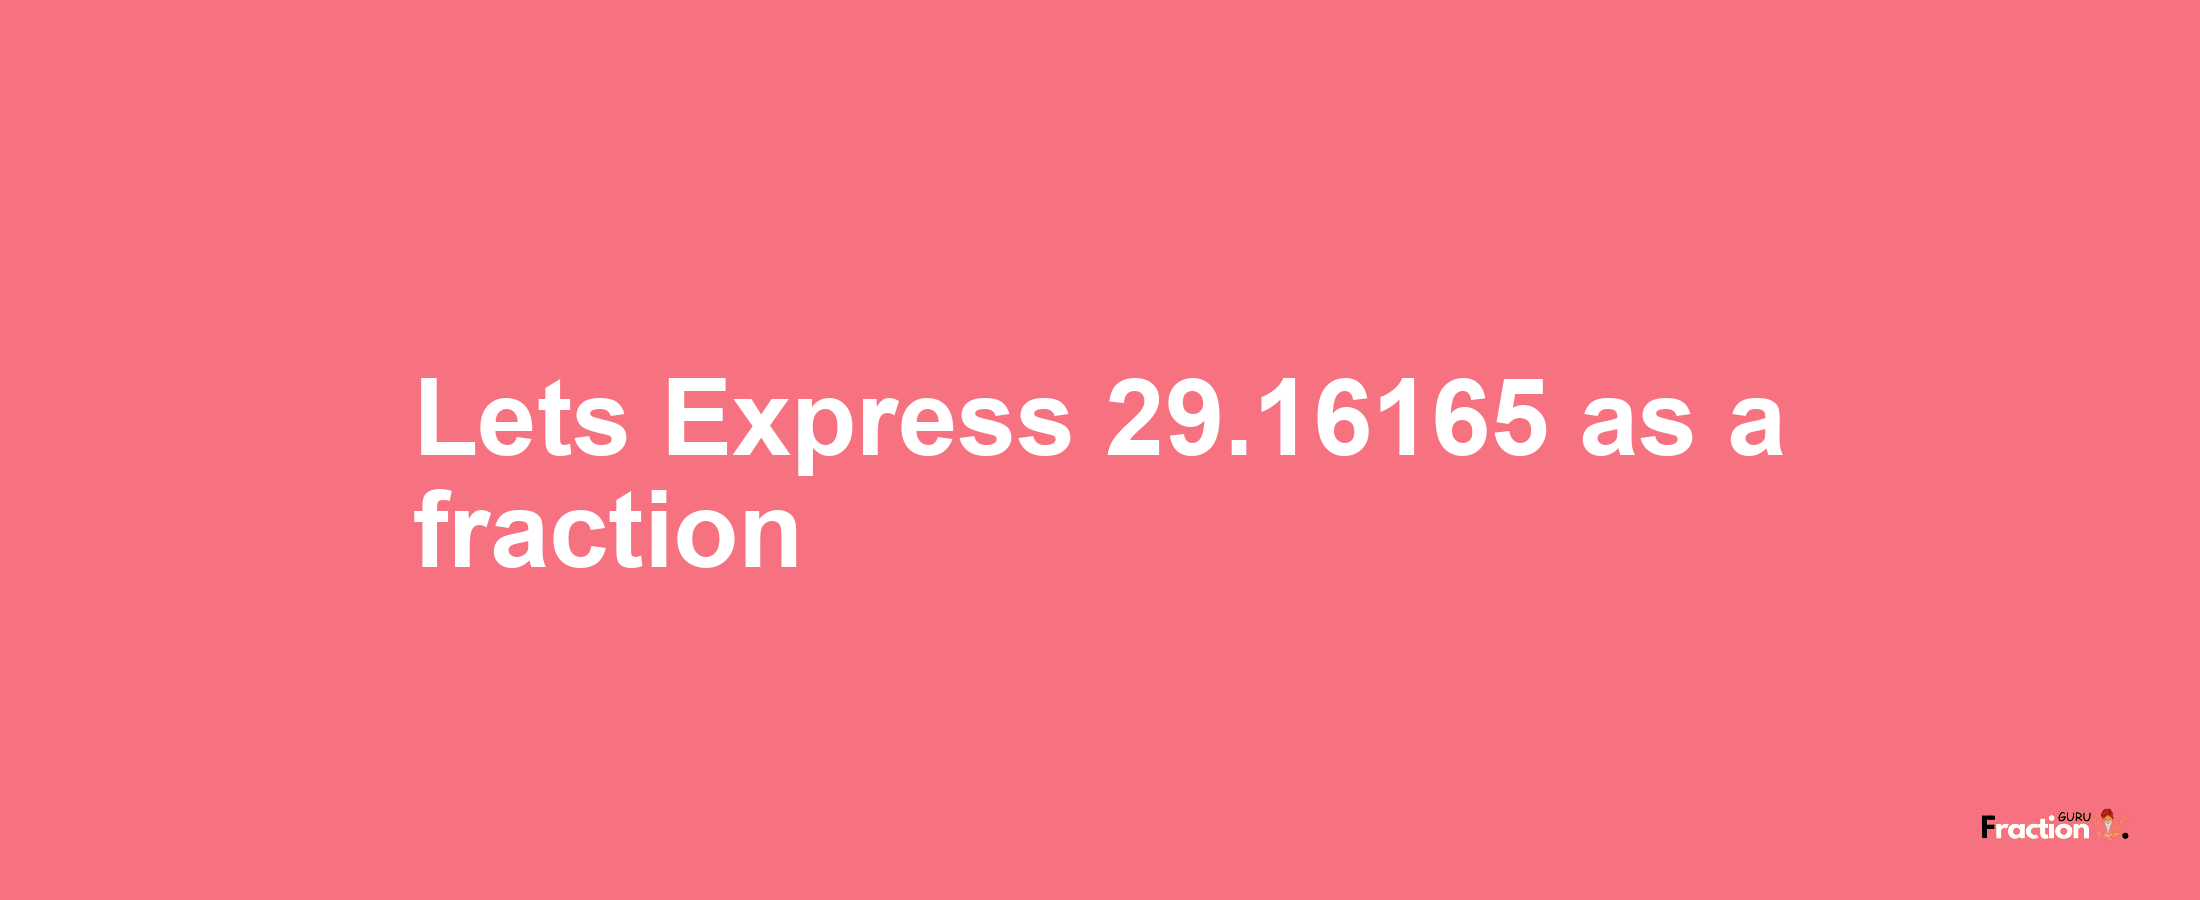 Lets Express 29.16165 as afraction